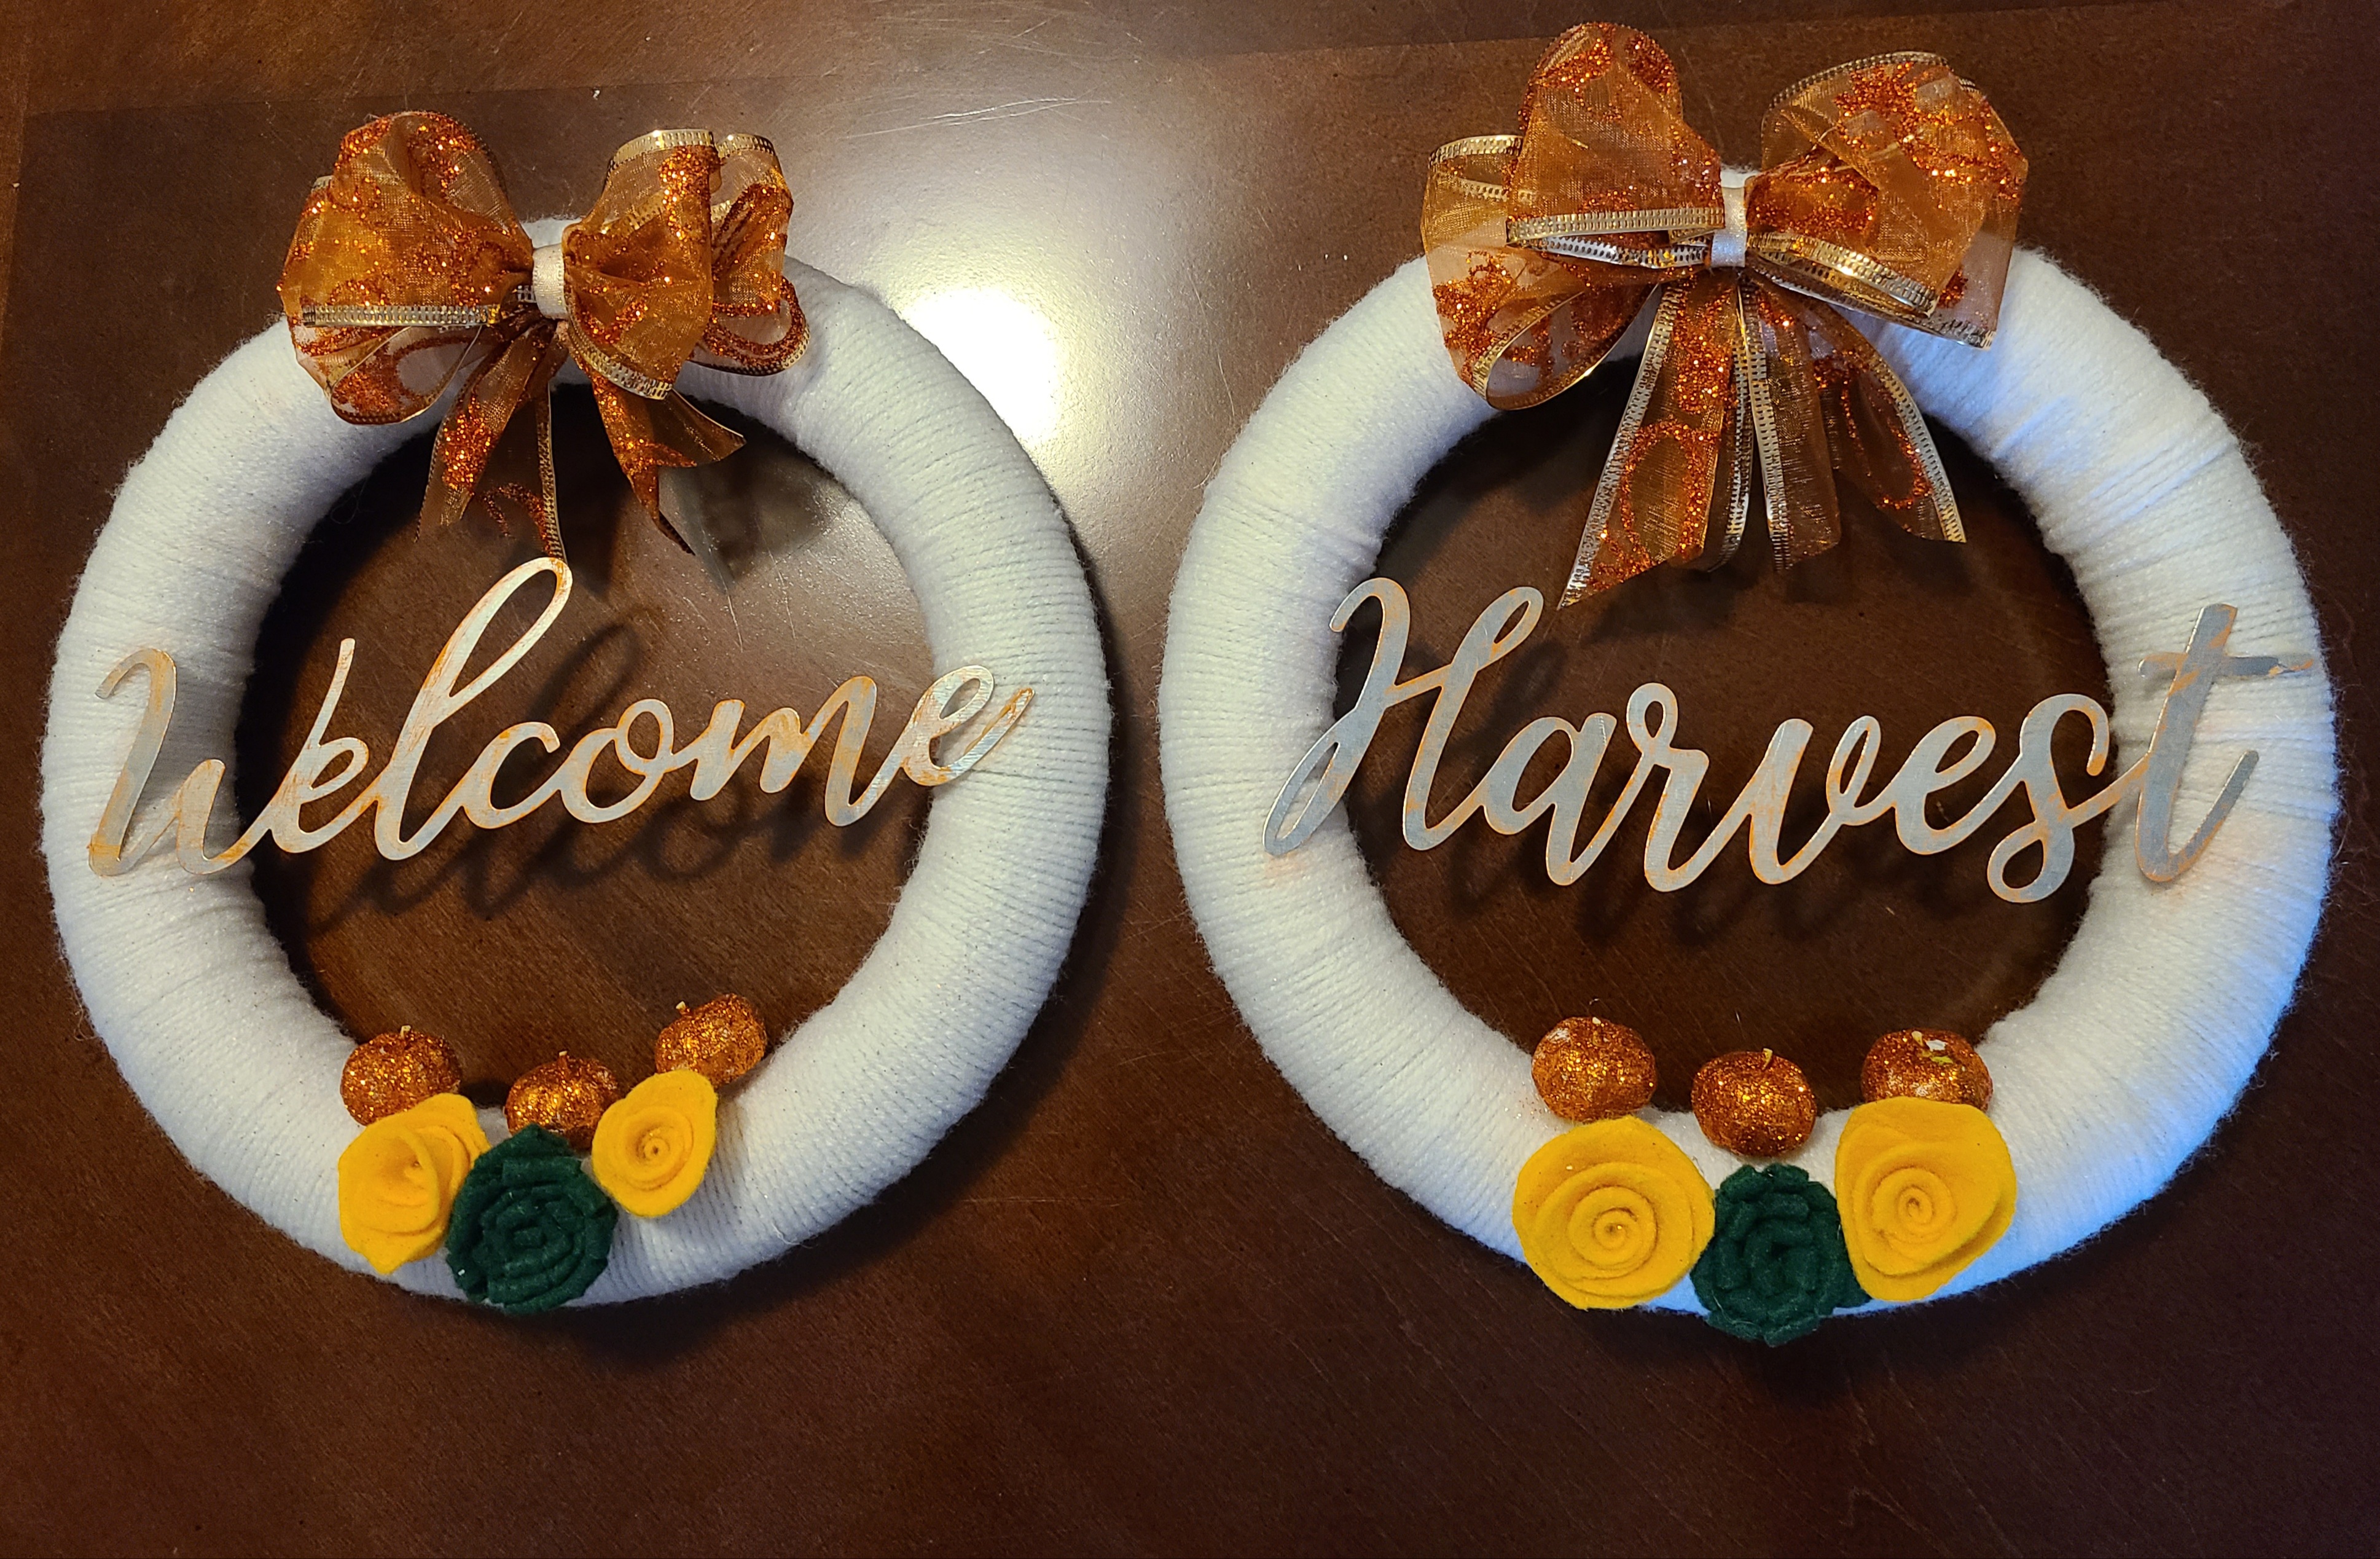 Two completed easy DIY fall wreaths next to each other- styrofoam forms covered with white yarn, orange pumpkin glittered ribbon made into bows placed at the top of each one, metal words in the middle "Welcome" on one "Harvest" on the other. Felt flowers are at the bottom with tiny orange glittered pumpkins glued above them.